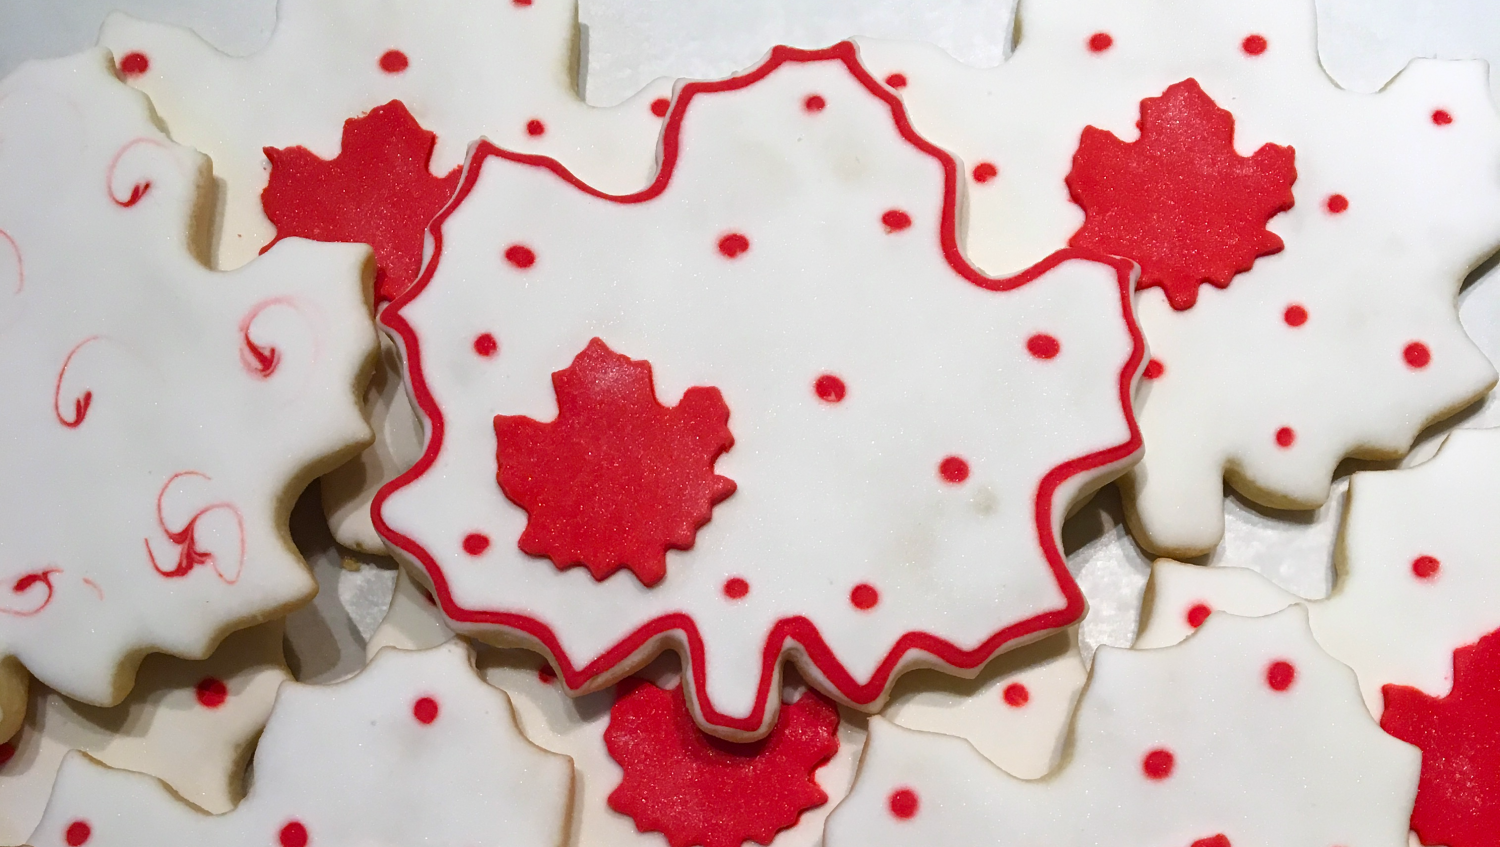 Celebrate Canada Day long weekend at the RFM!